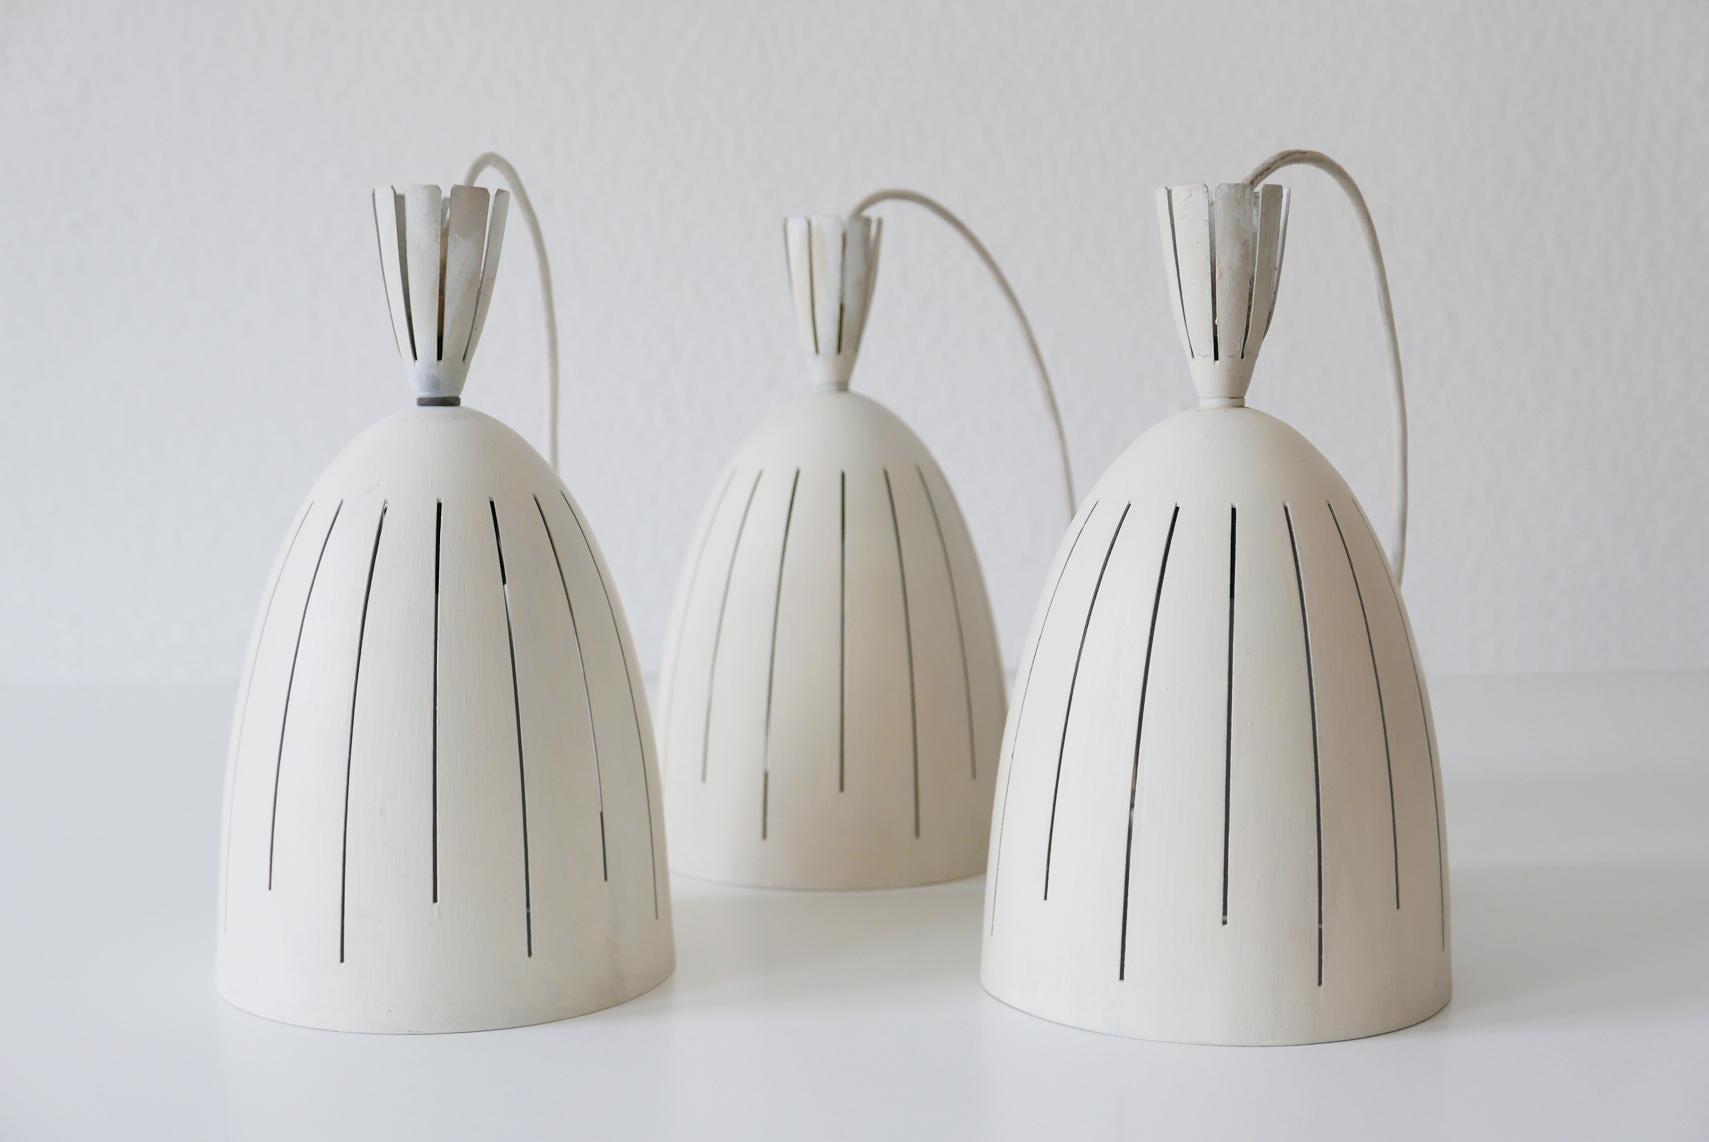 Set of Three Lovely Mid-Century Modern Diabolo Pendant Lamps, 1950s, Germany For Sale 10